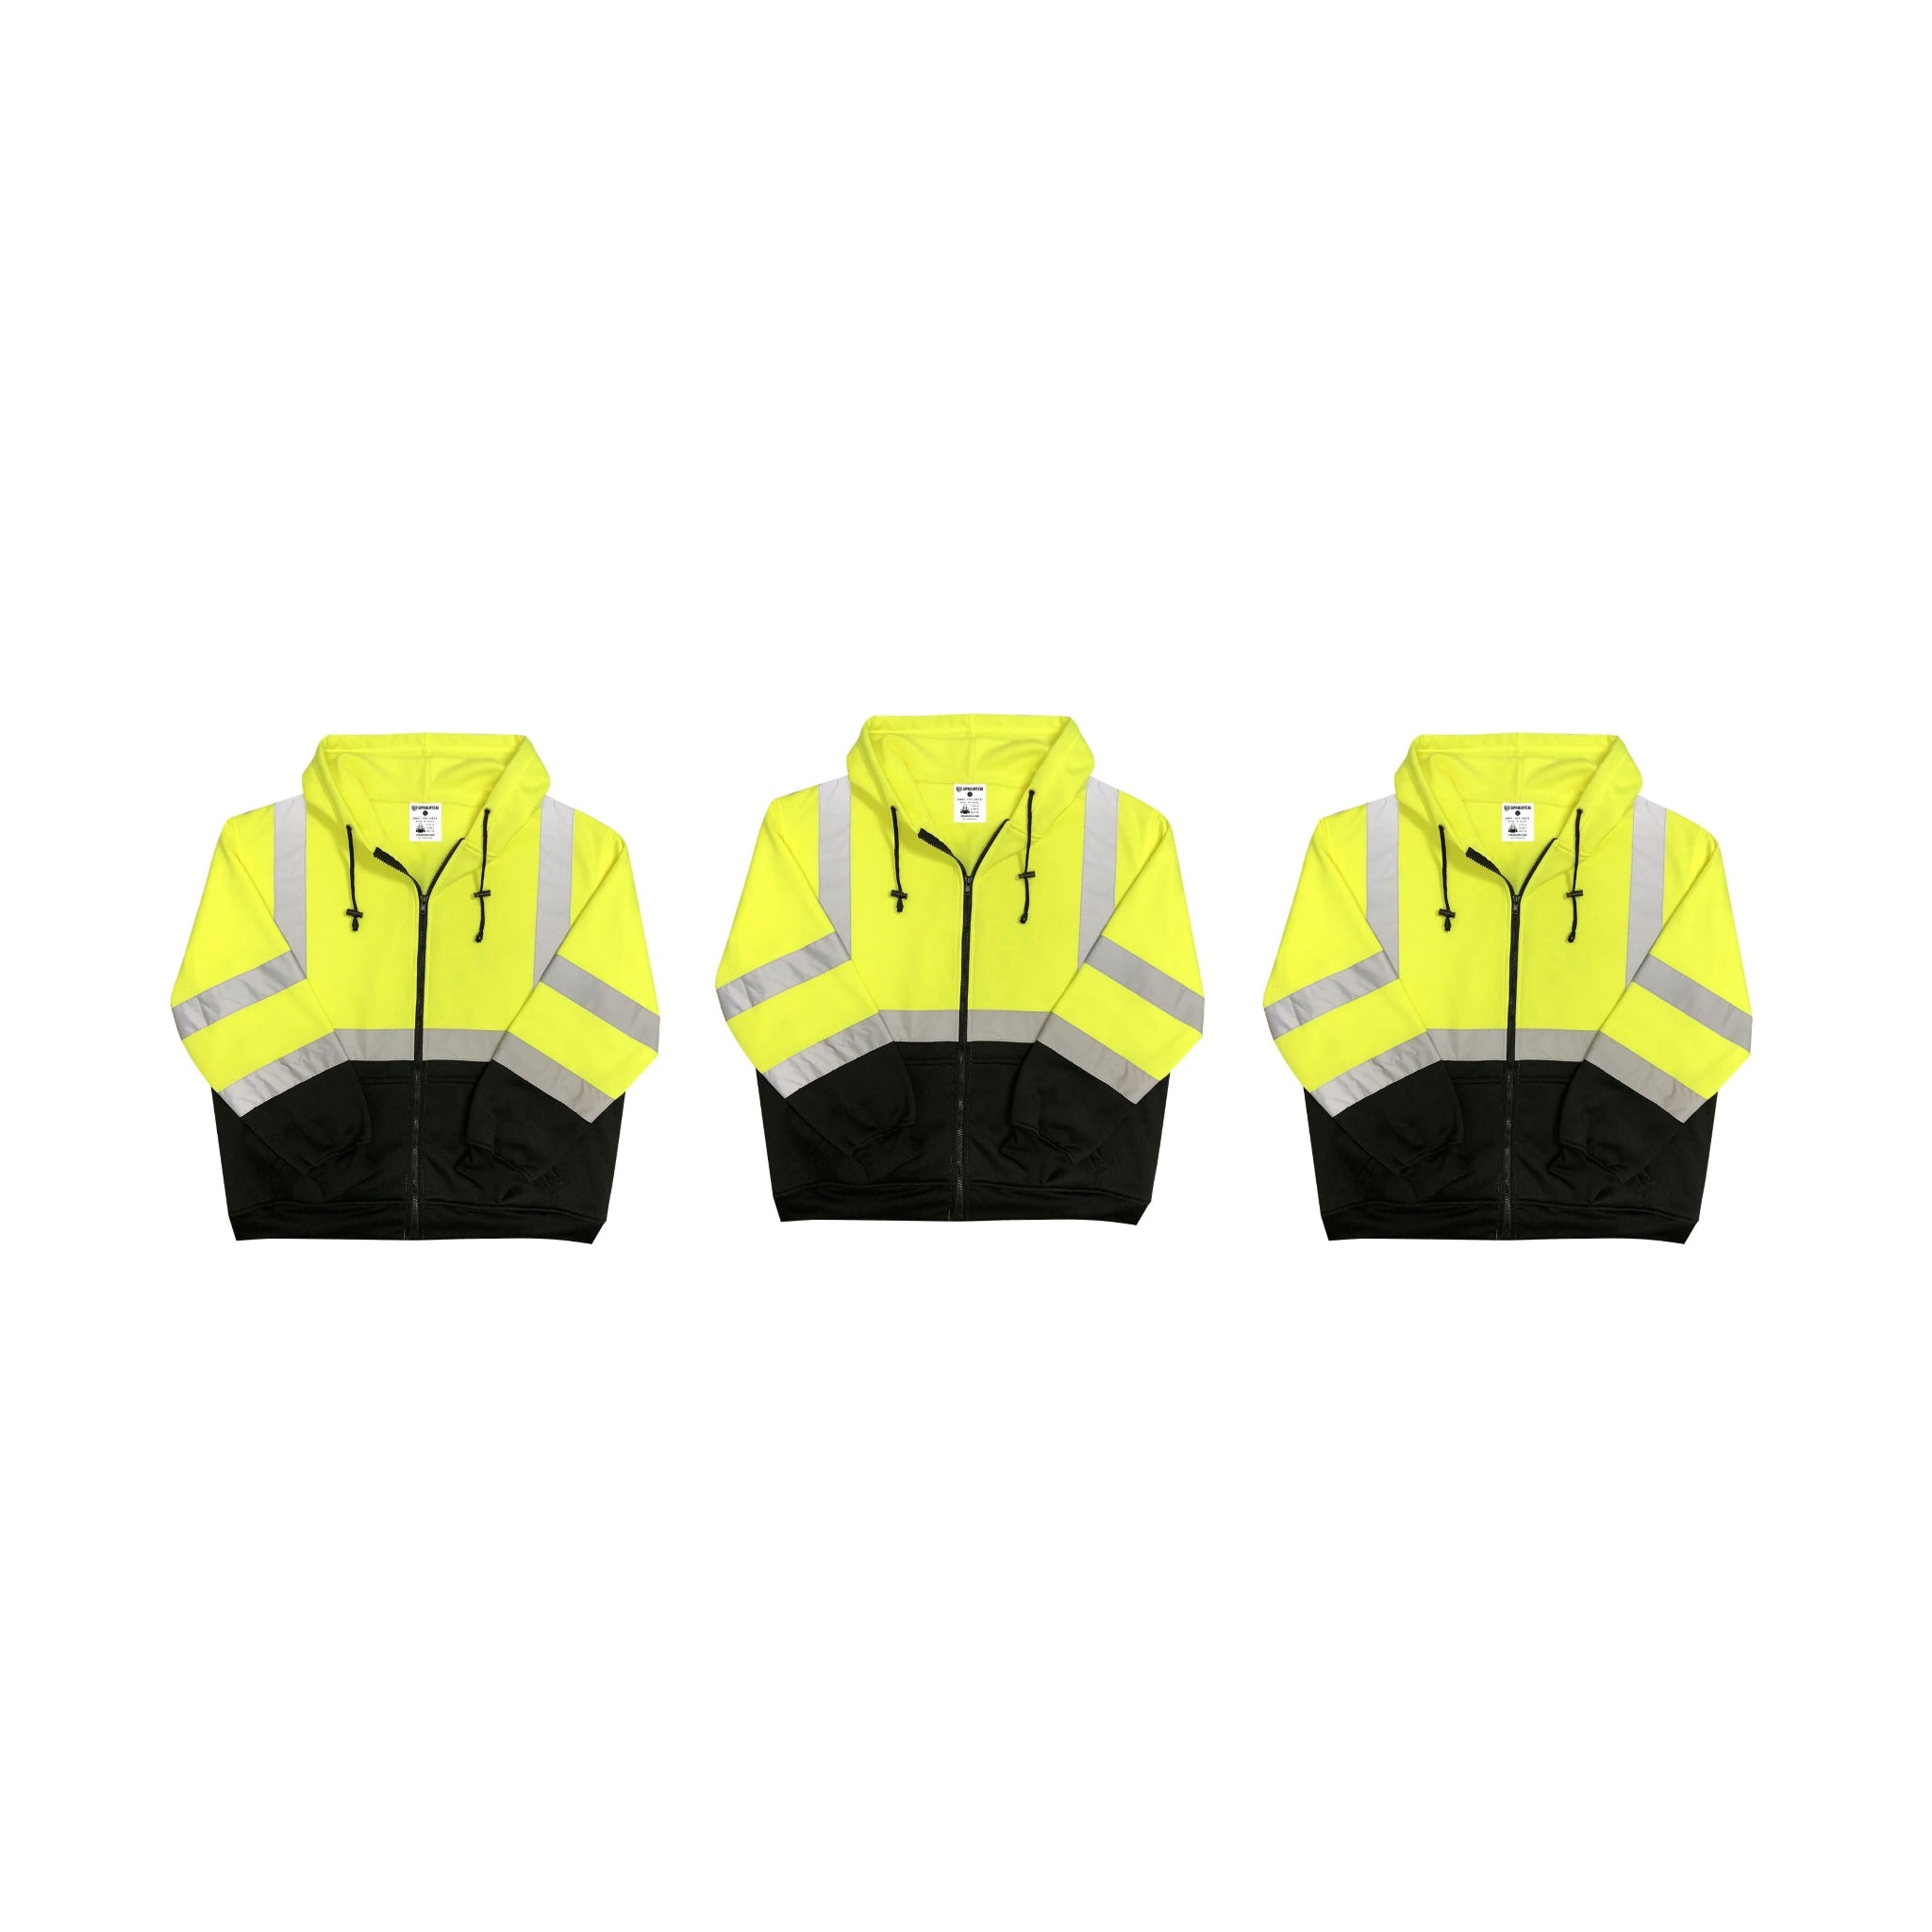 Safety Main 05LWJYB Lightweight Jacket, Class 3, Hi-Vis Yellow with Black Bottom, Pack of 3